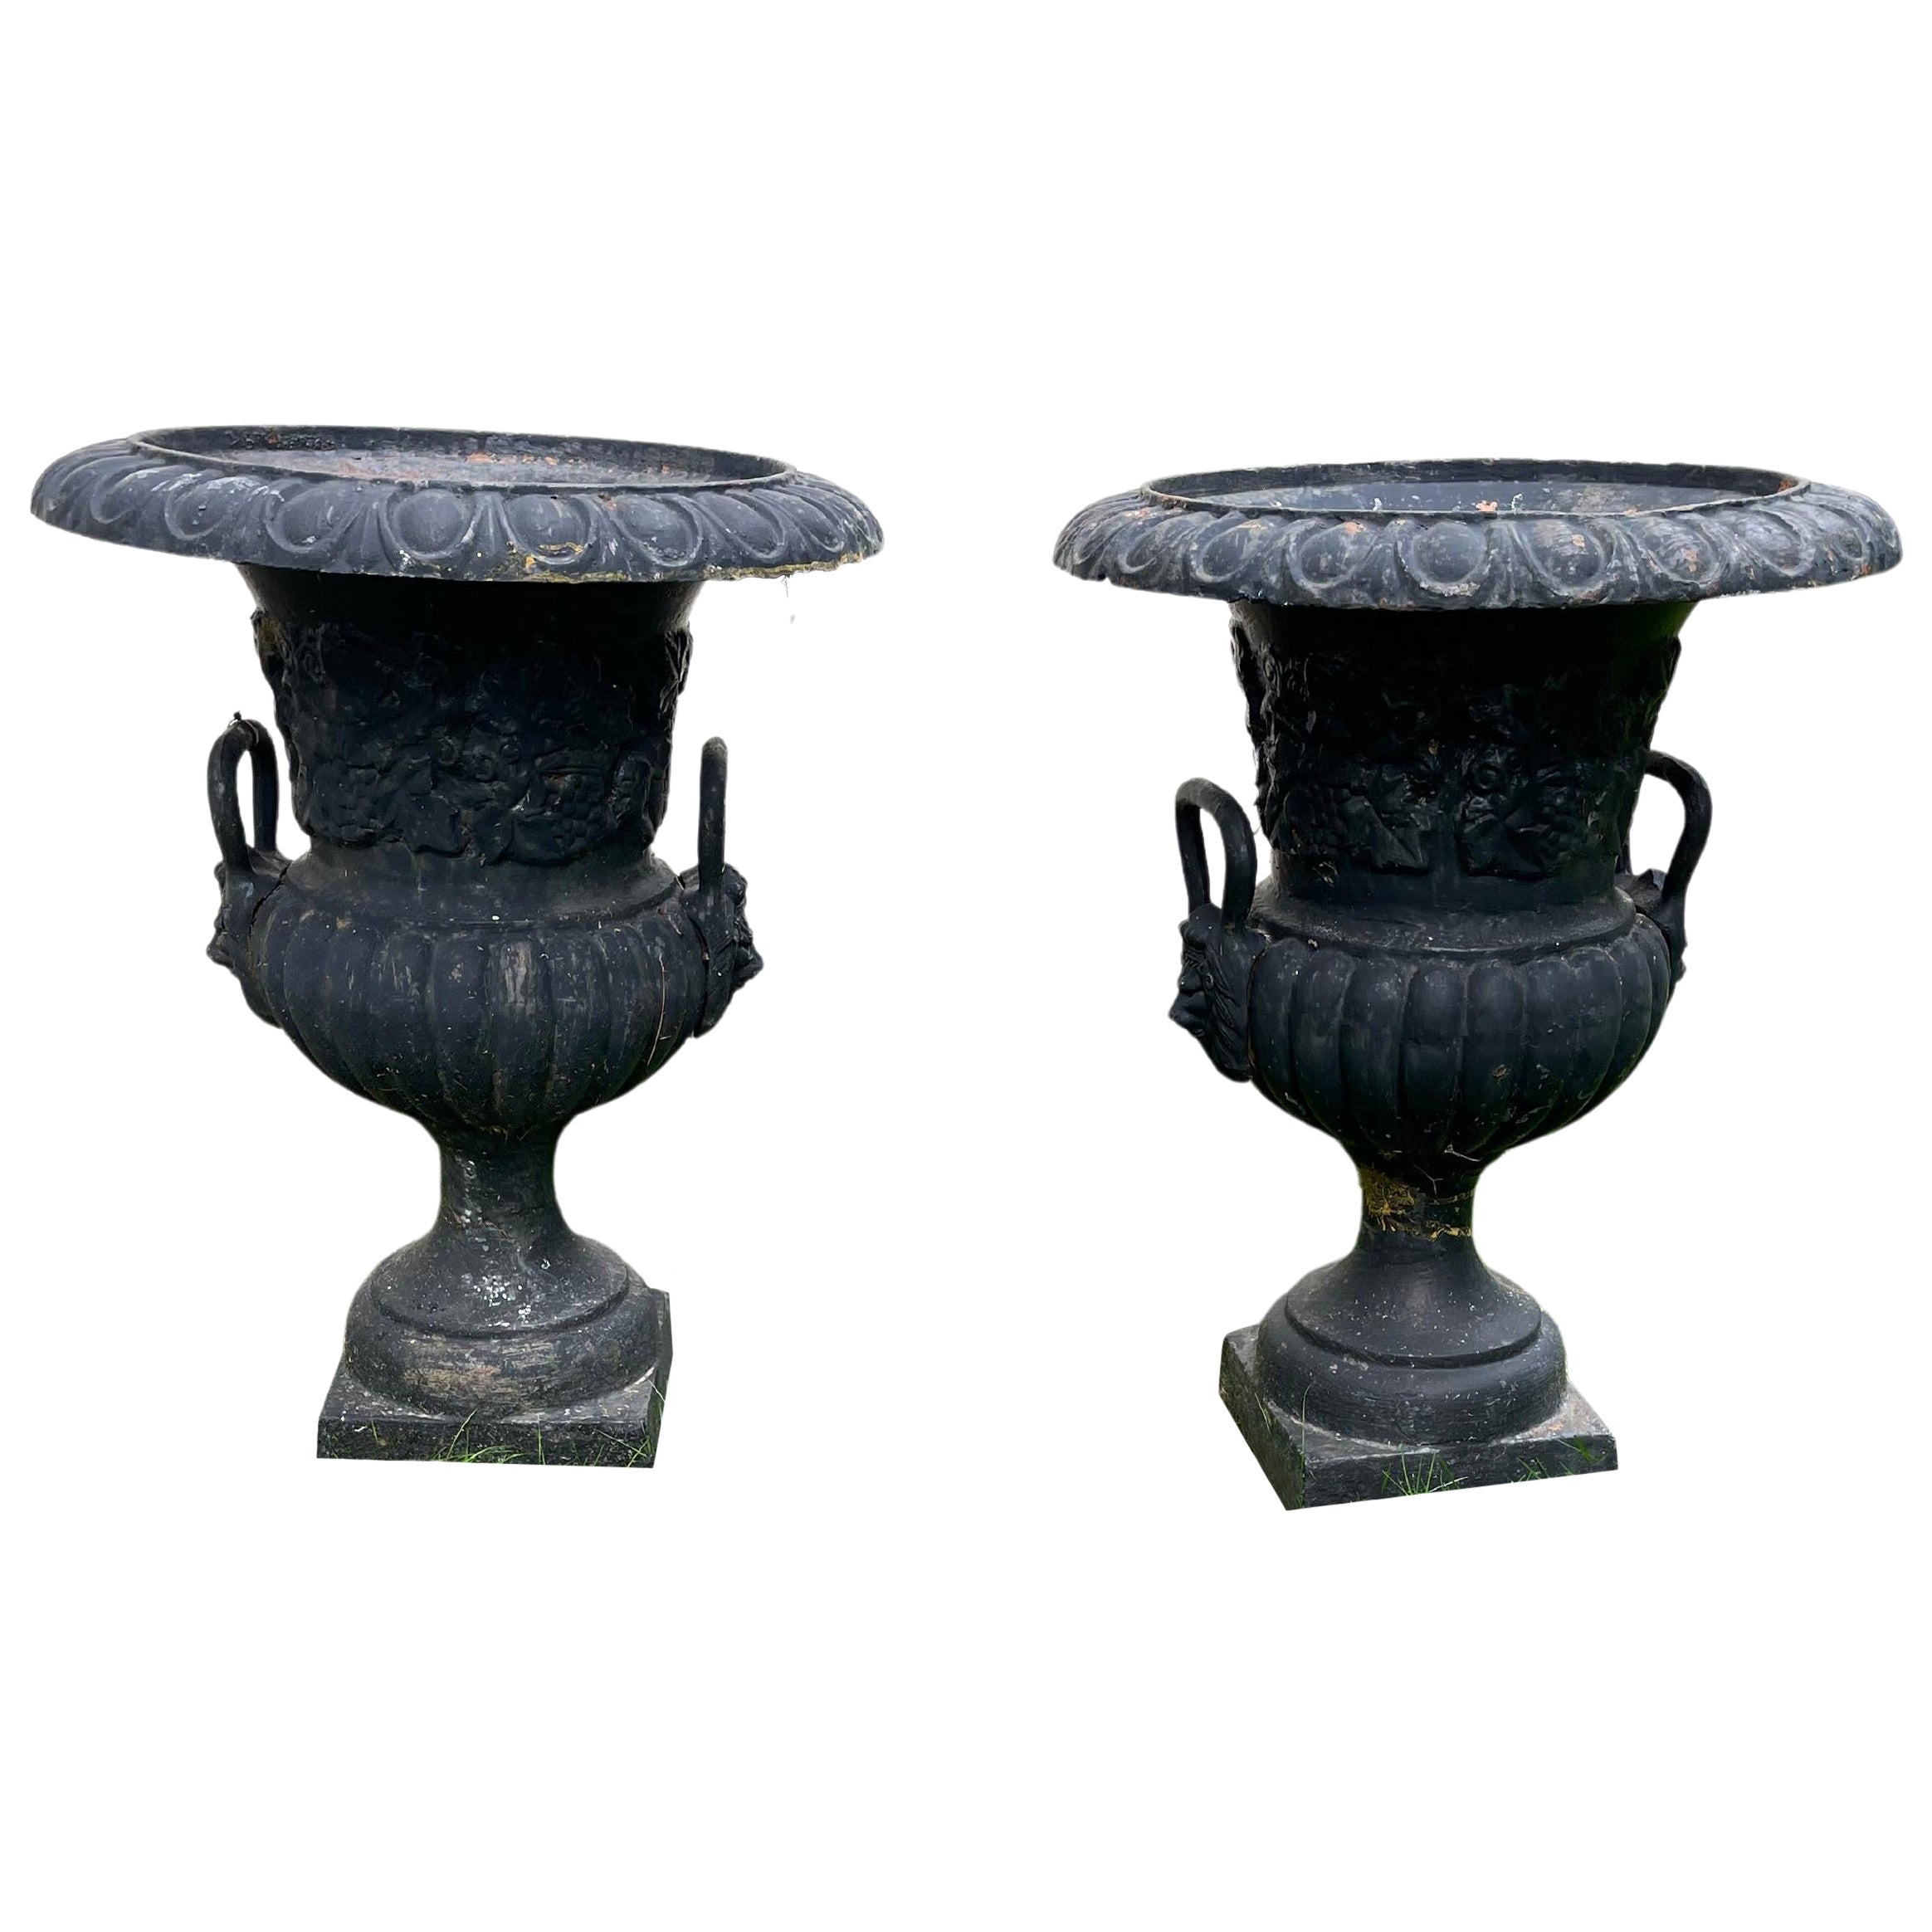 Pair of Black Neoclassical Garden Urns with Lion Mask Decoration For Sale